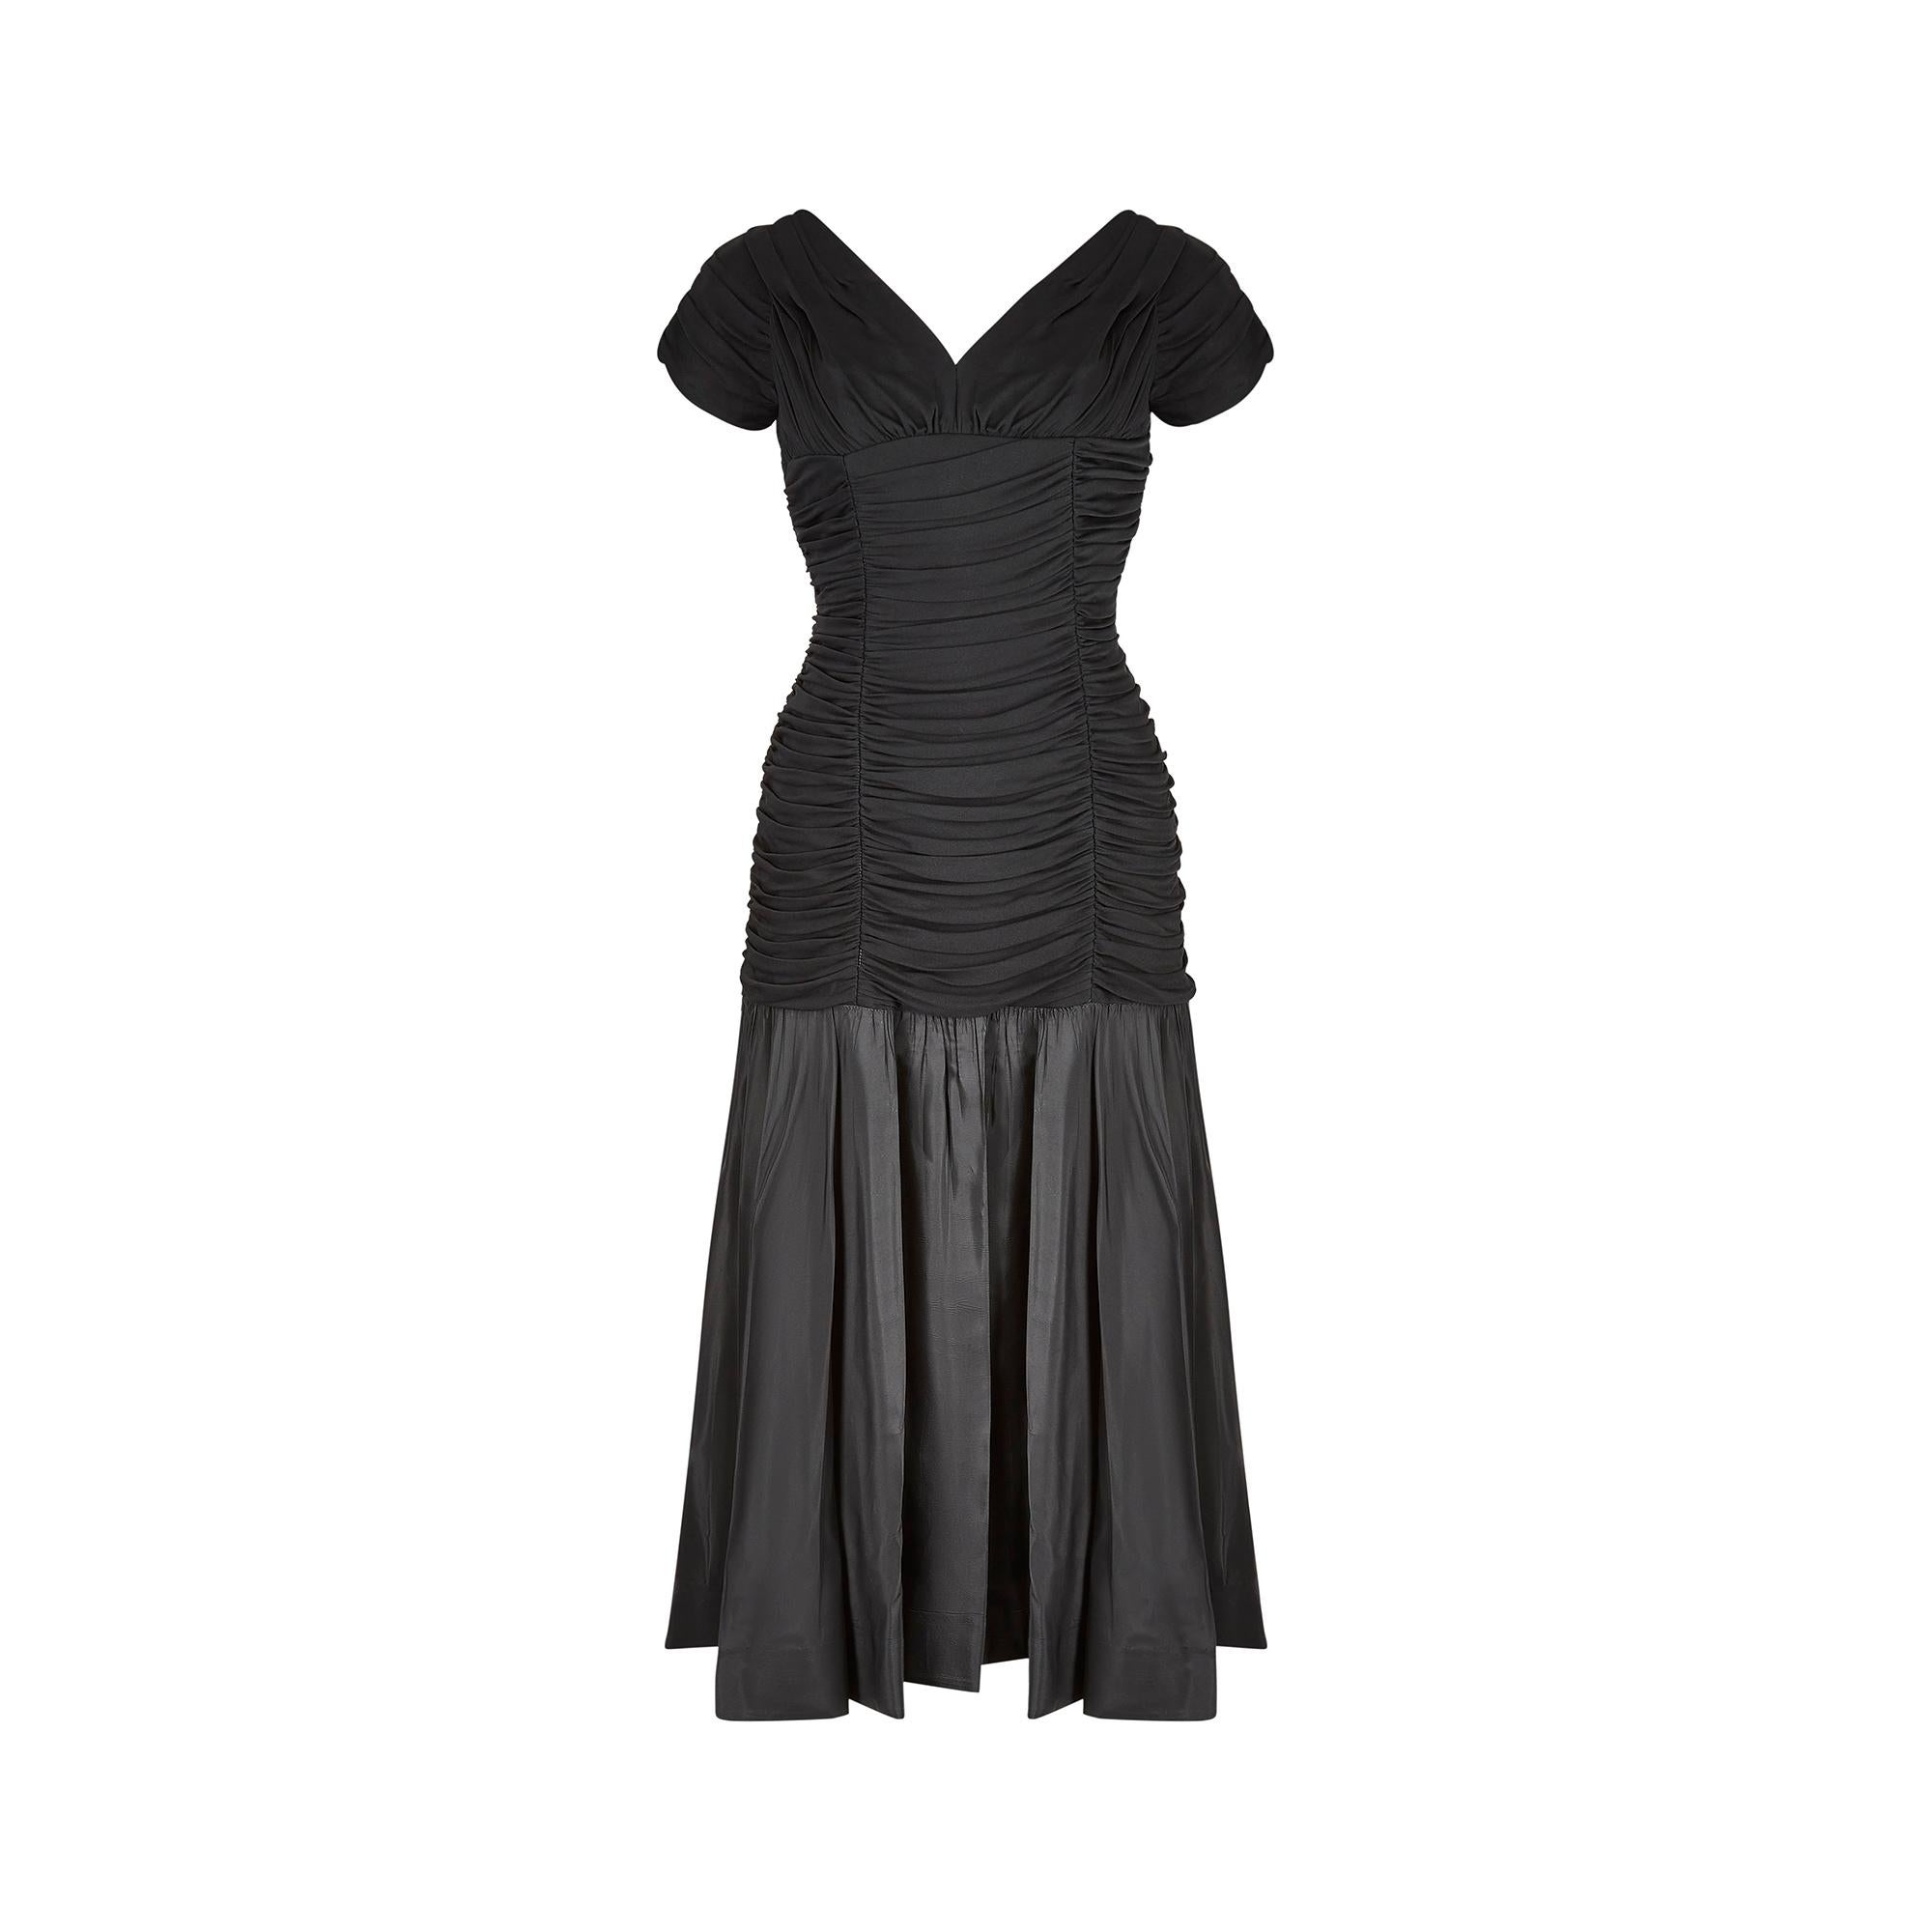 This early 1950s Ceil Chapman taffeta and silk dress is a timeless and elegant party dress. It has a fitted ruched bodice, cut from soft black silk jersey, which hugs the body beautifully to create a feminine shape. The ruching is sewn in two